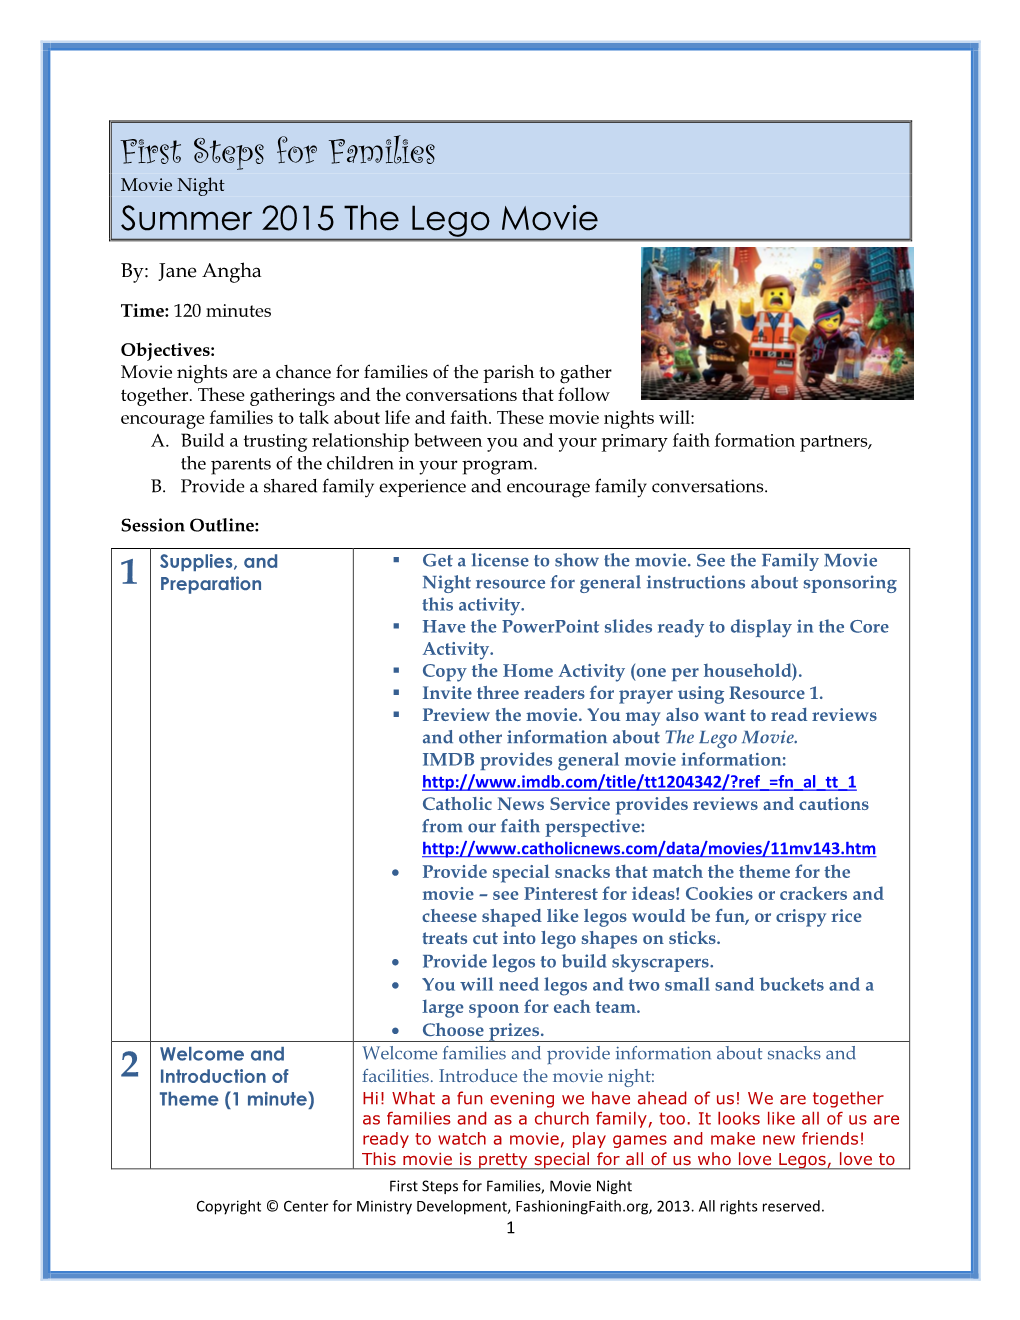 First Steps for Families Movie Night Summer 2015 the Lego Movie